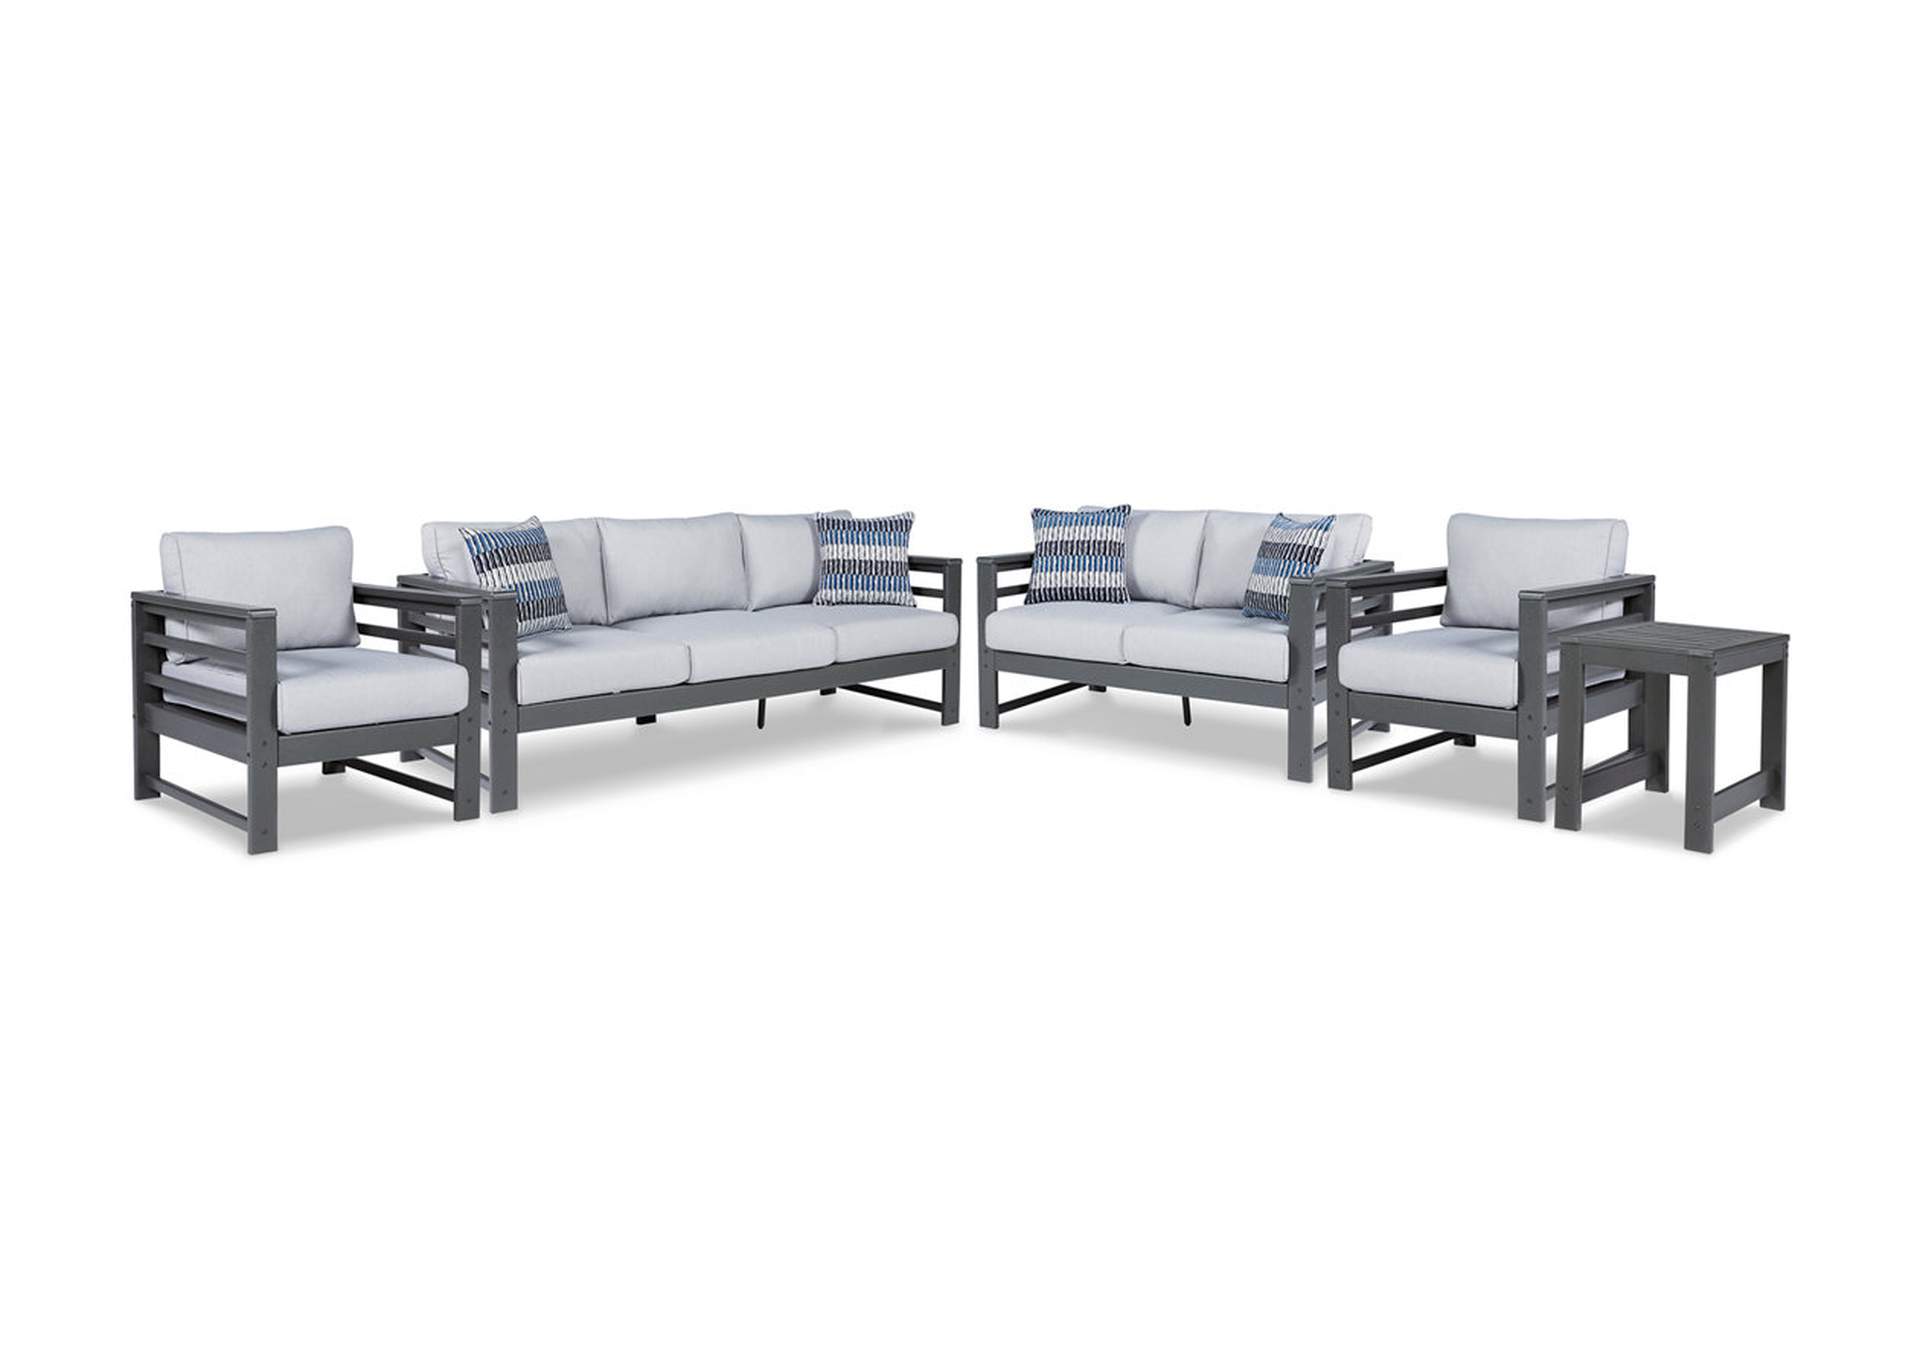 Amora Outdoor Sofa, Loveseat and 2 Lounge Chairs with End Table